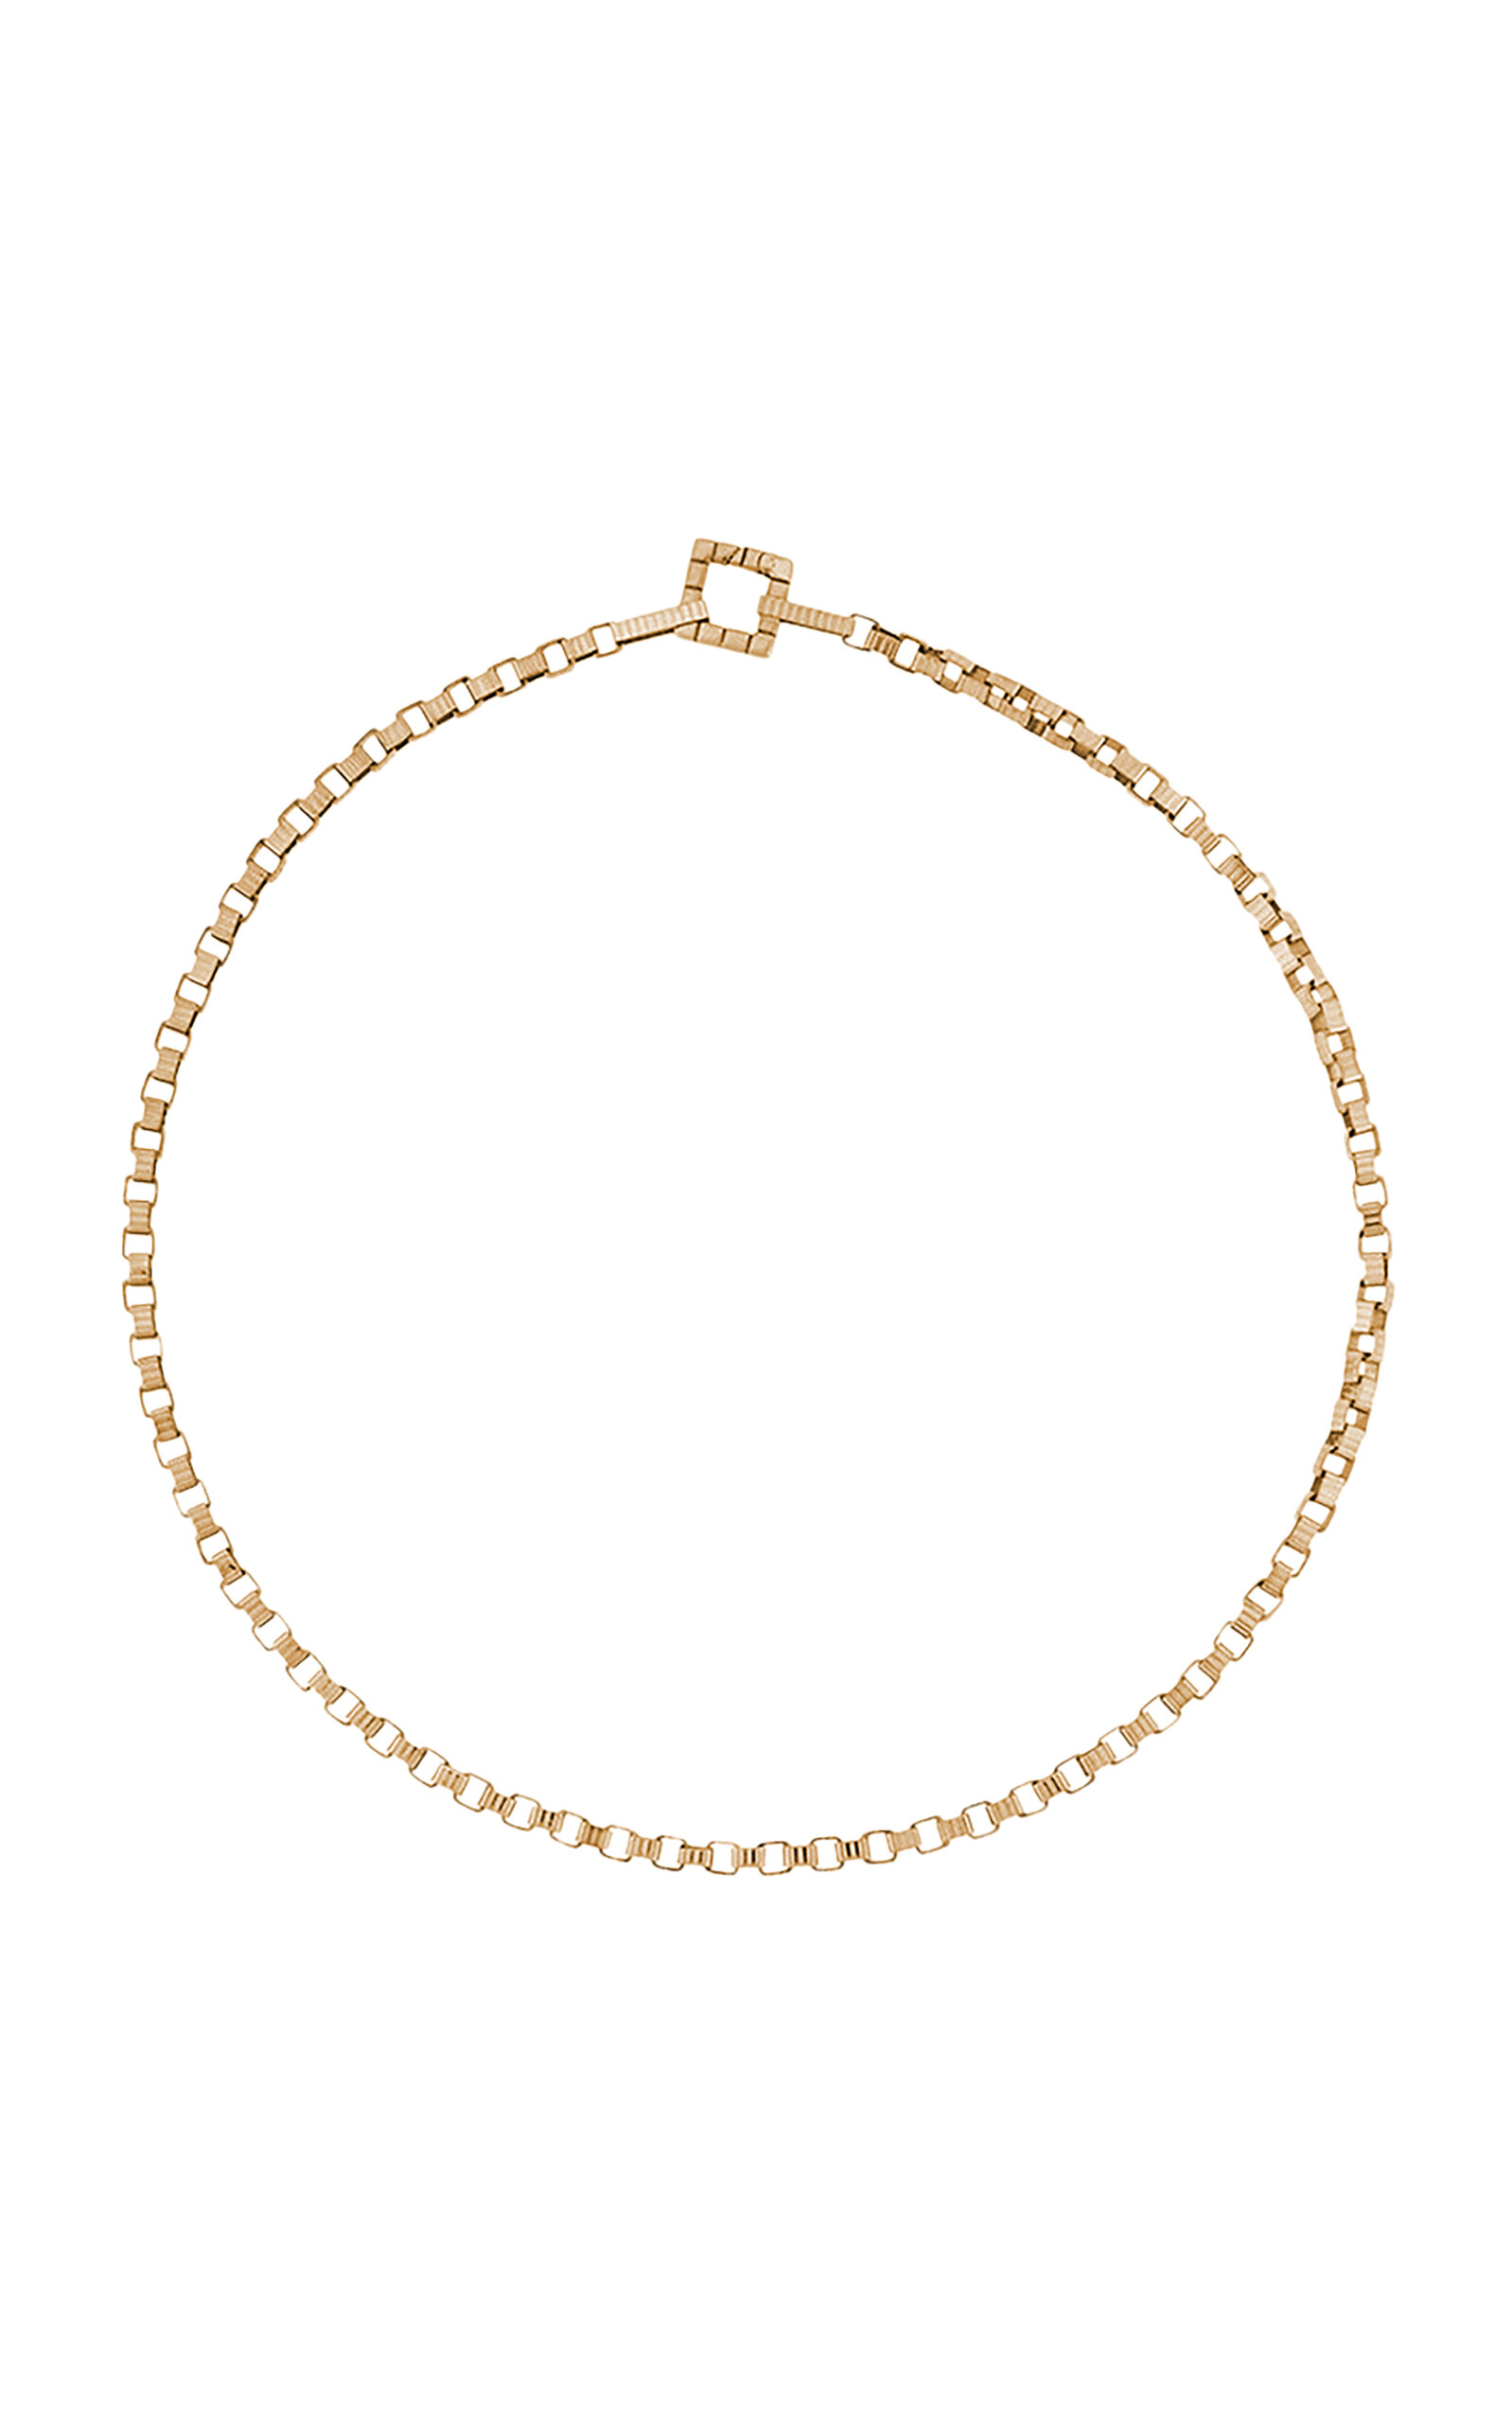 IVI Women's Signore Chain 18k Gold-Plated Choker